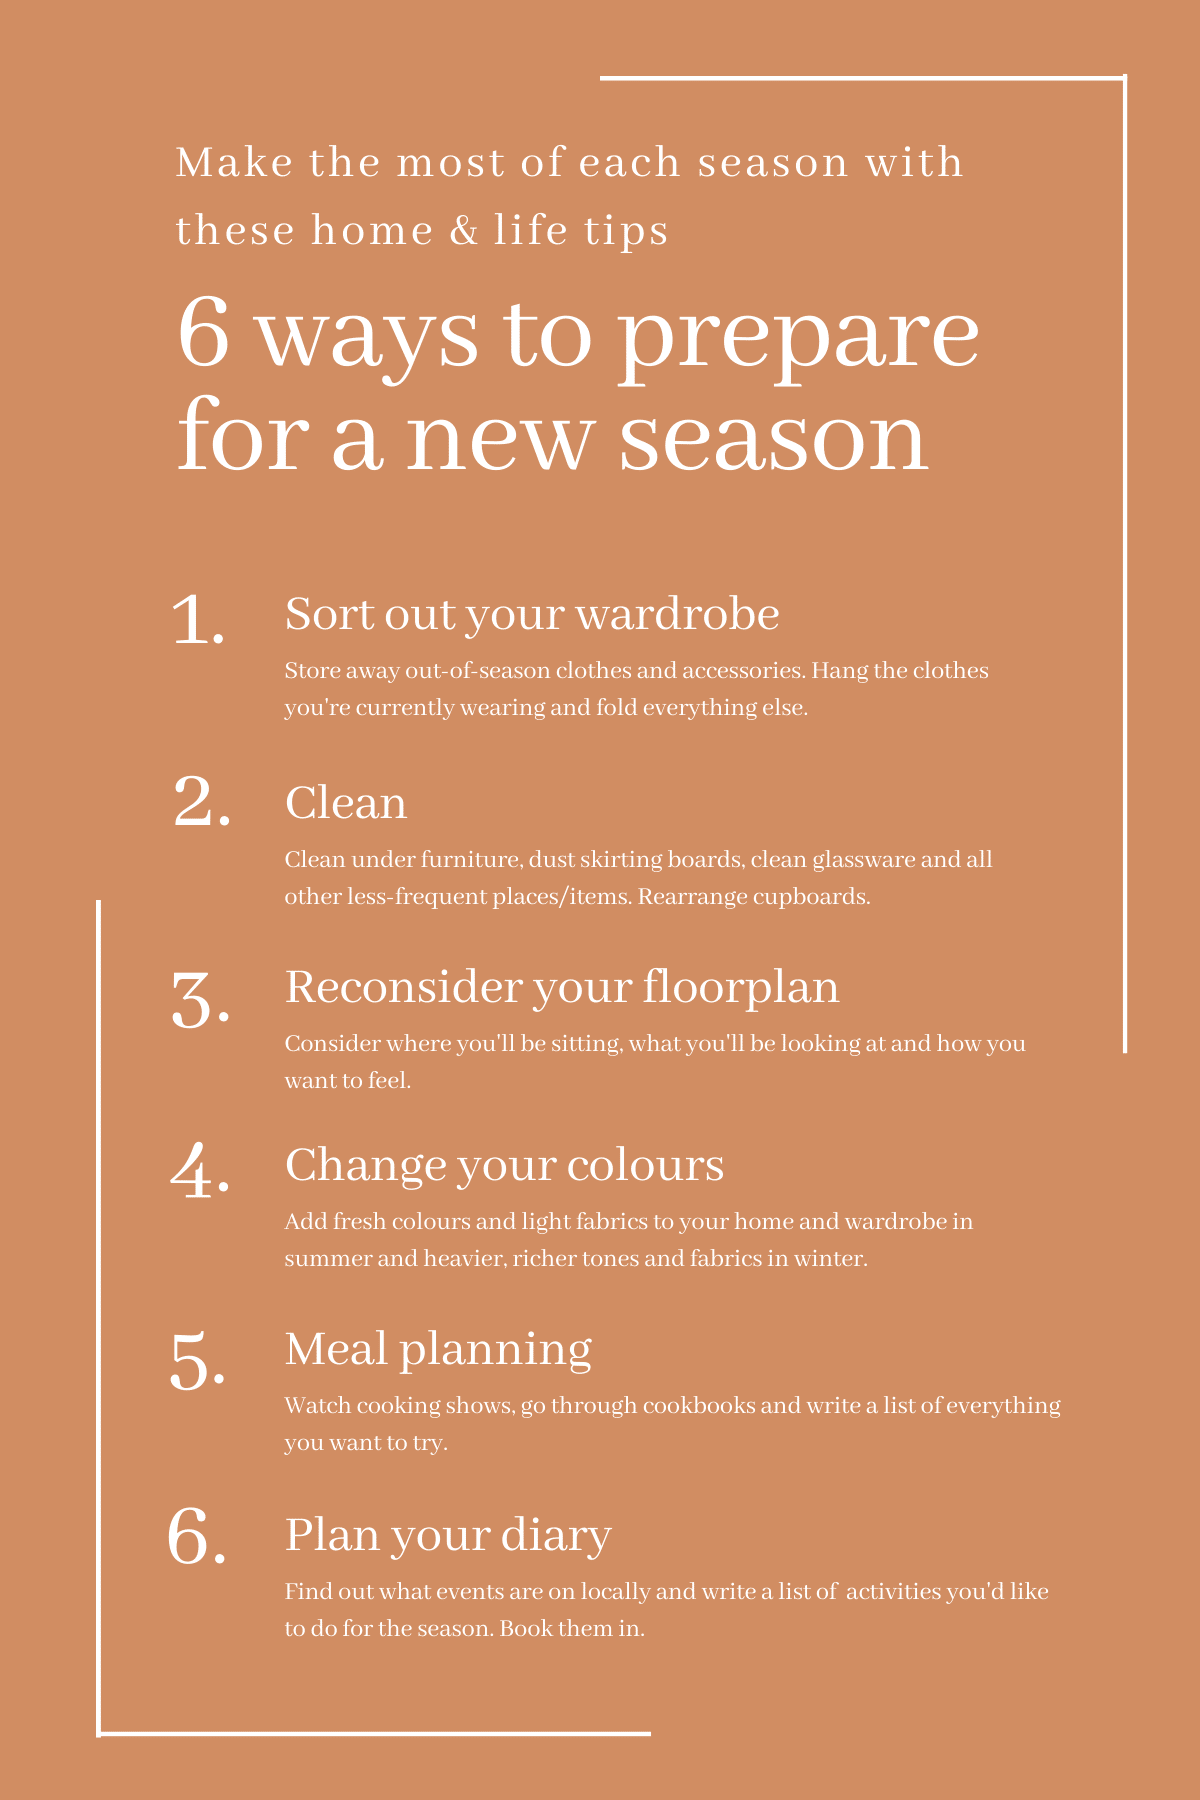 ways to prepare for a new season infographic